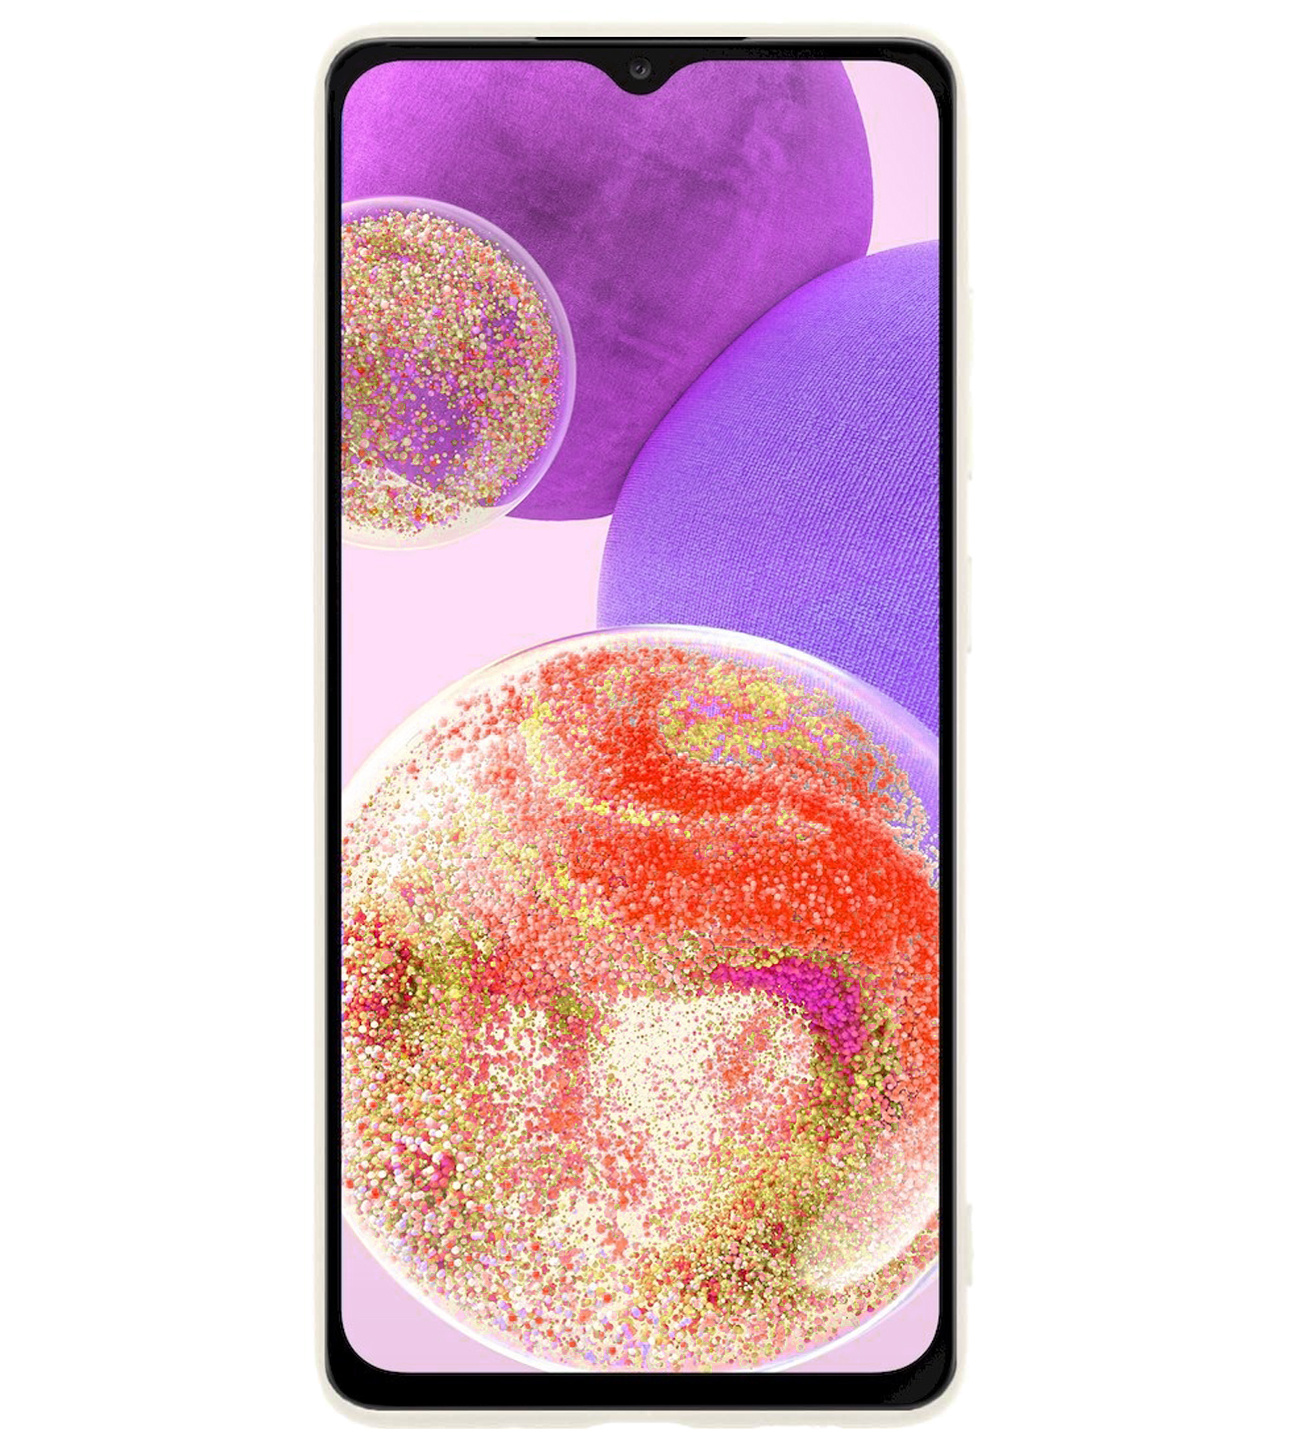 BASEY. Hoes Geschikt voor Samsung A23 Hoesje Siliconen Back Cover Case - Hoesje Geschikt voor Samsung Galaxy A23 Hoes Cover Hoesje - Wit